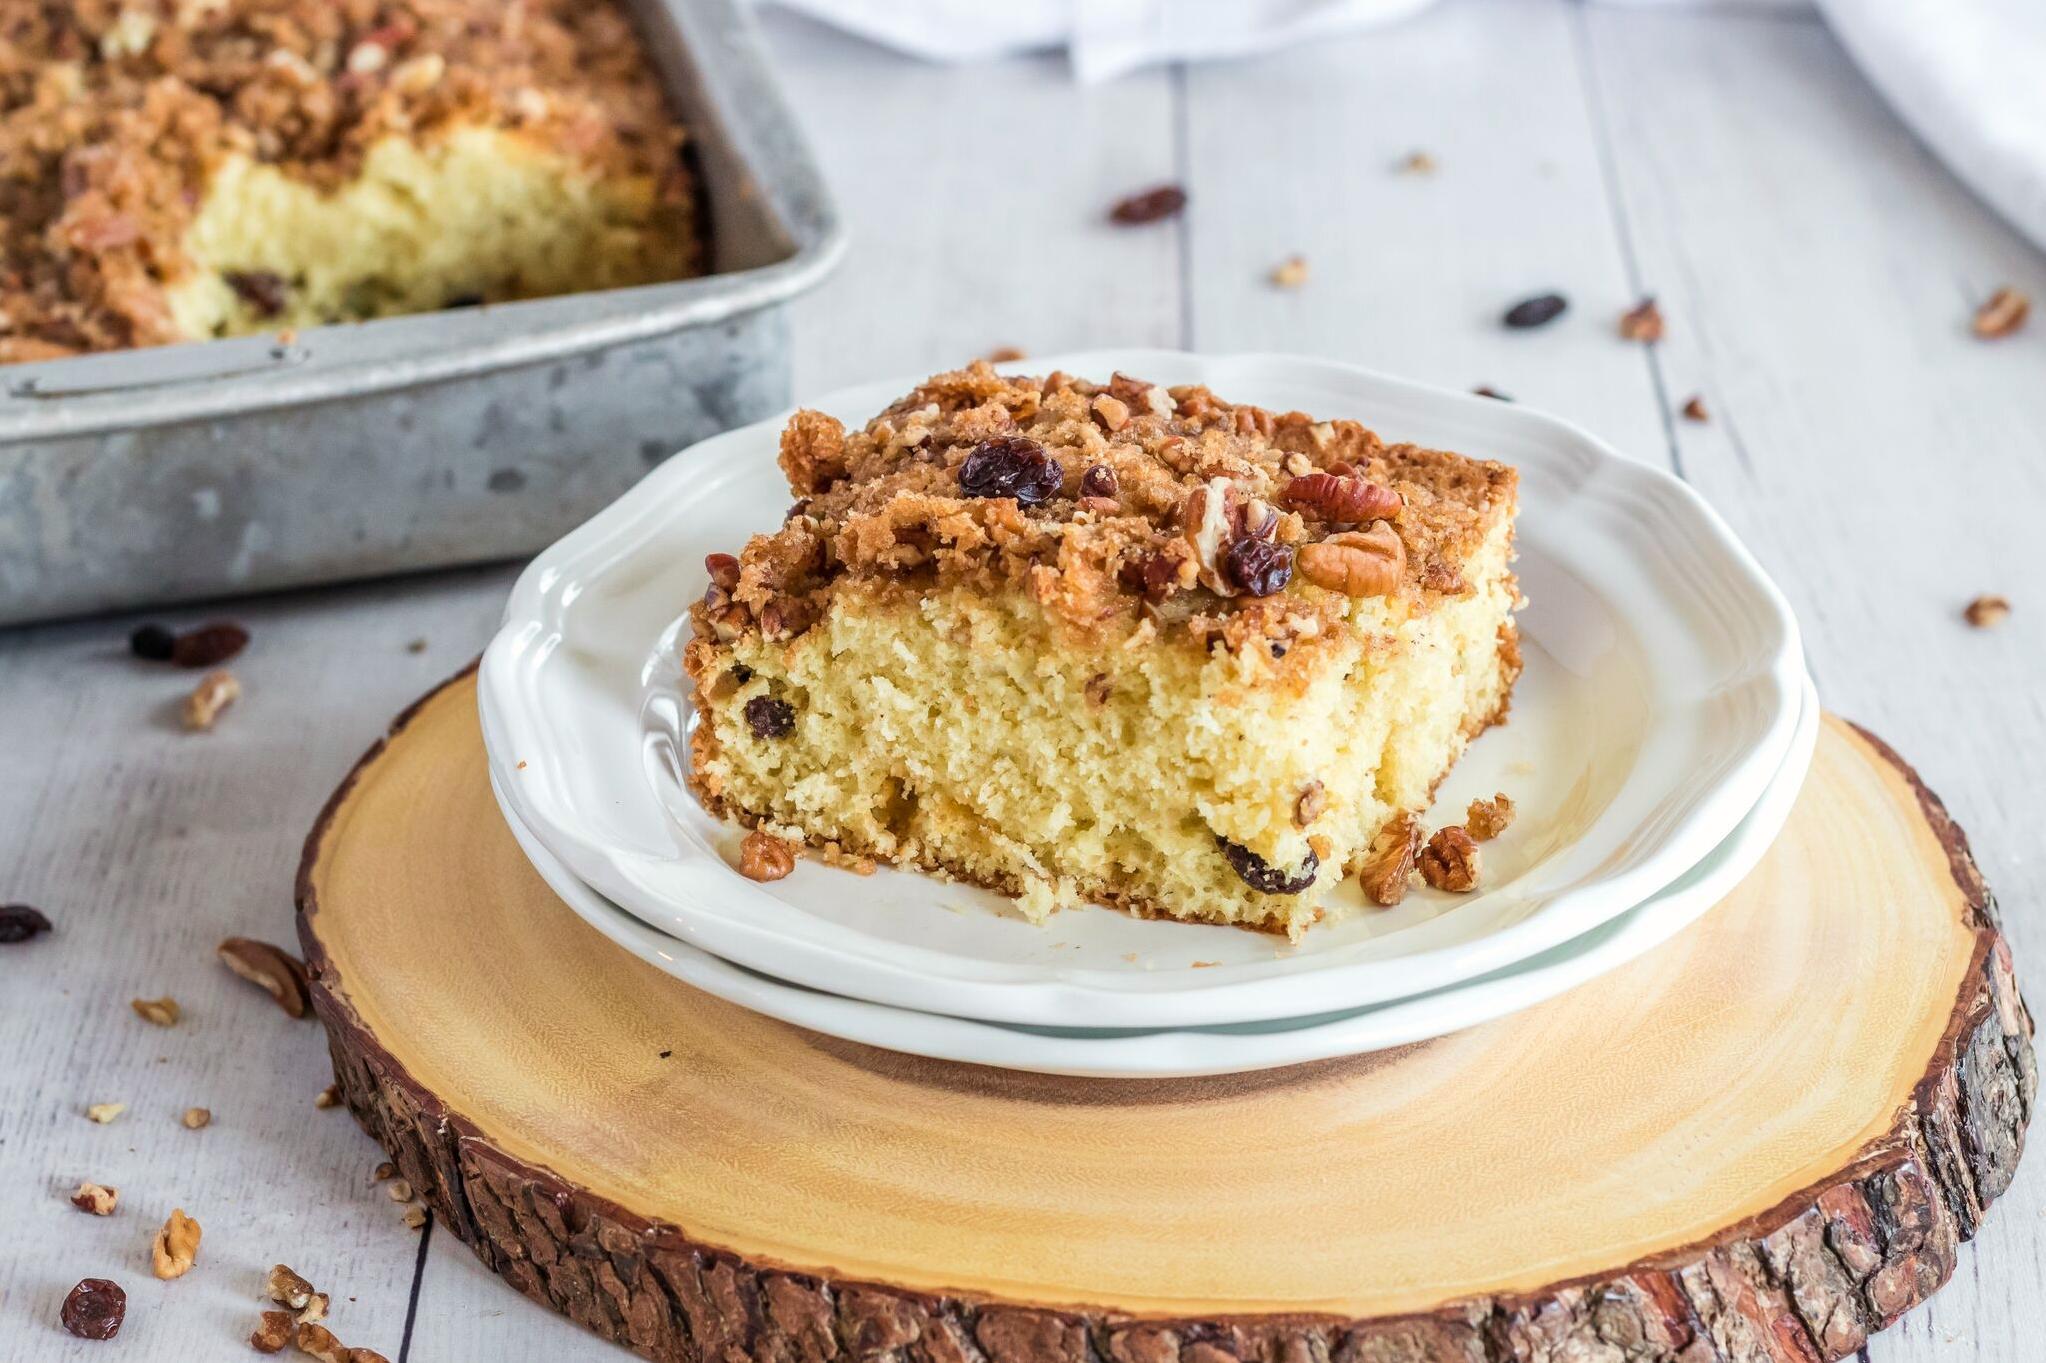  With its nutty flavor and creamy texture, this coffee cake is a surefire crowd-pleaser